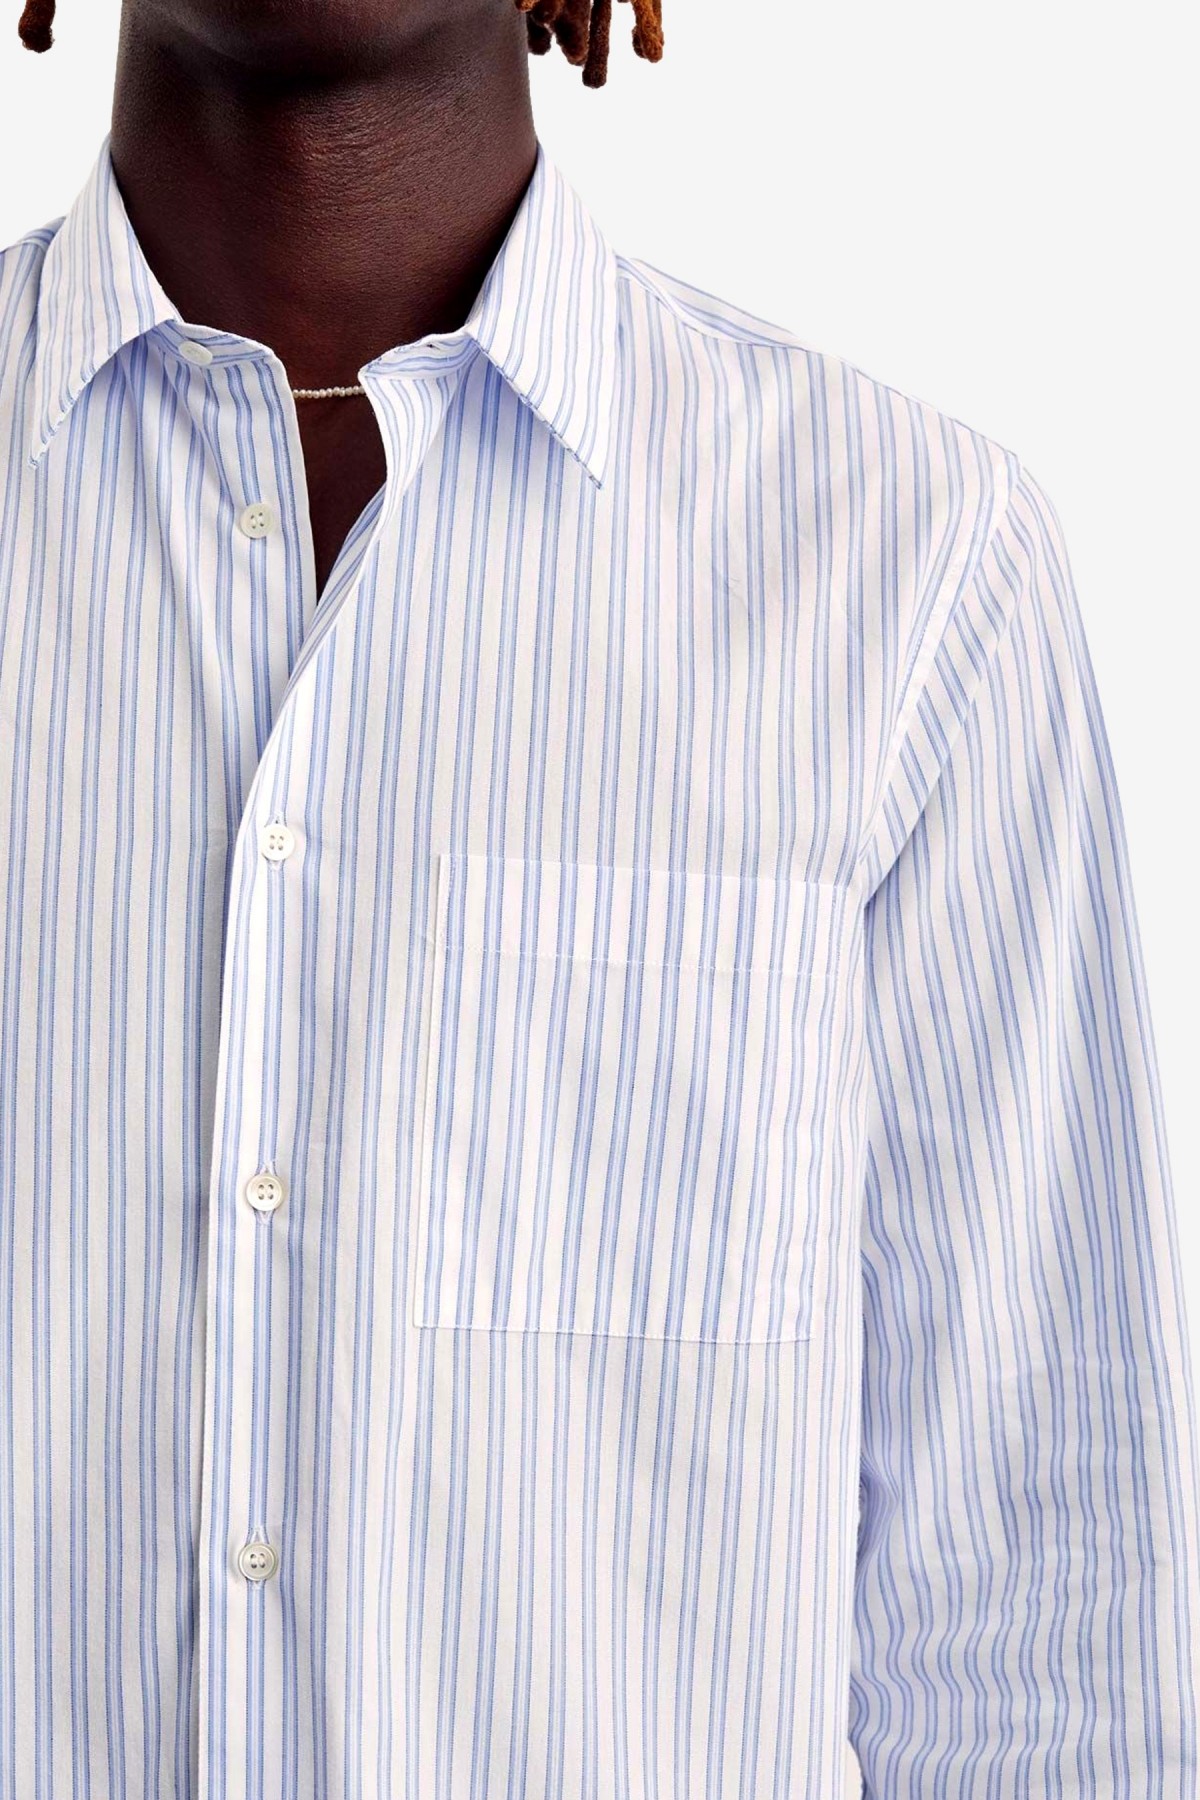 Another Aspect Shirt 3.0 in Hockney Stripe